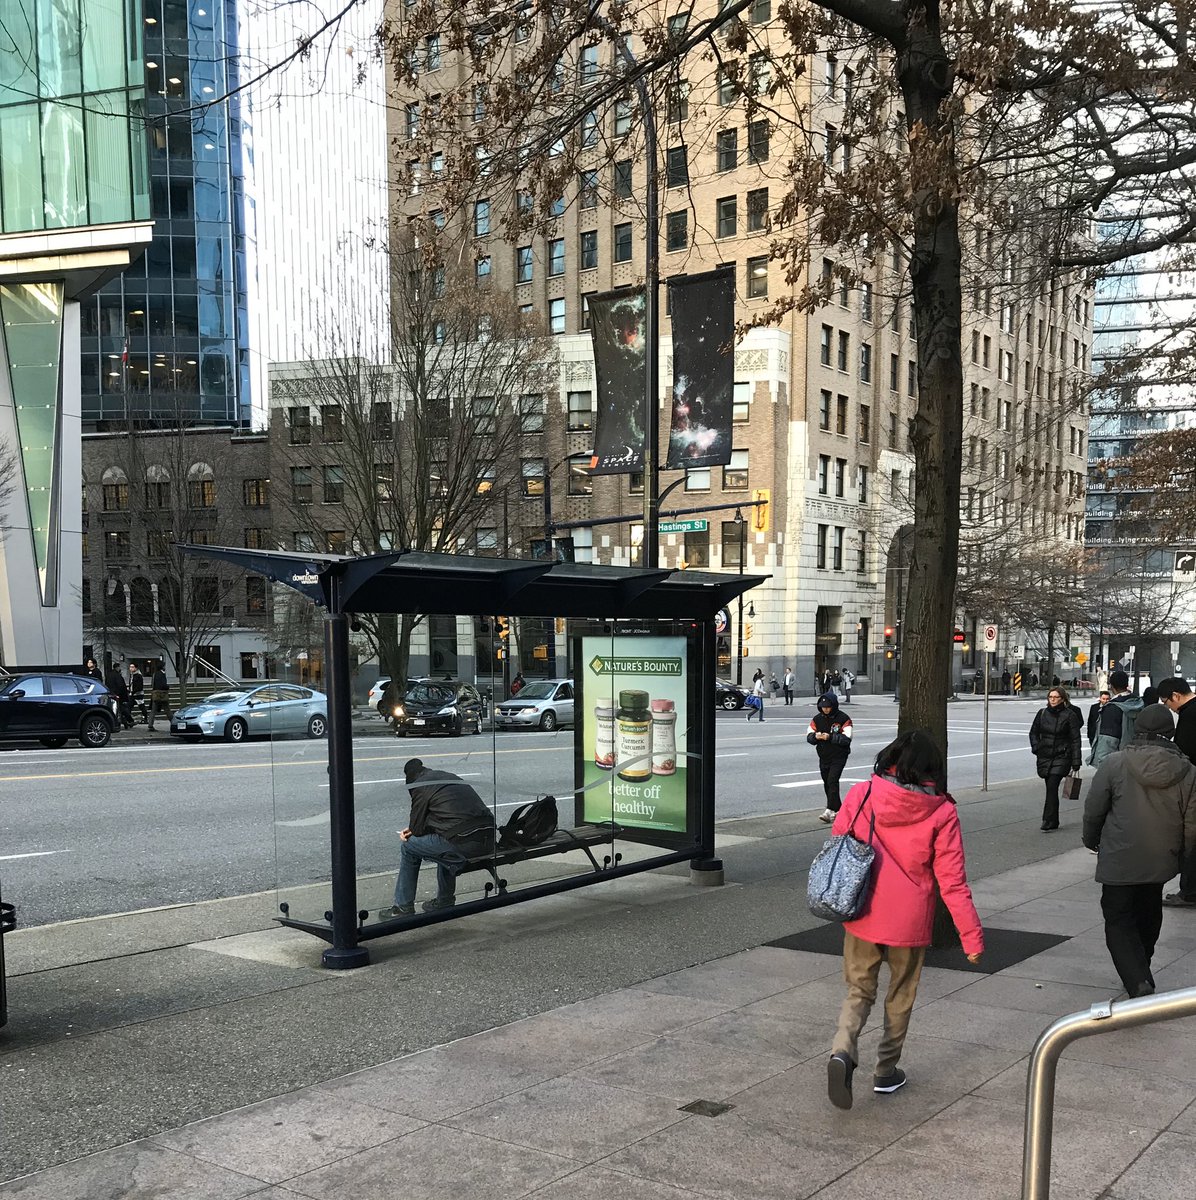 Observing all the patterns of use and vibrant social life that make up our commute. #vanbusstops .
#yvrcommunity 
#lowcarbon 
#vancouver #dtvan